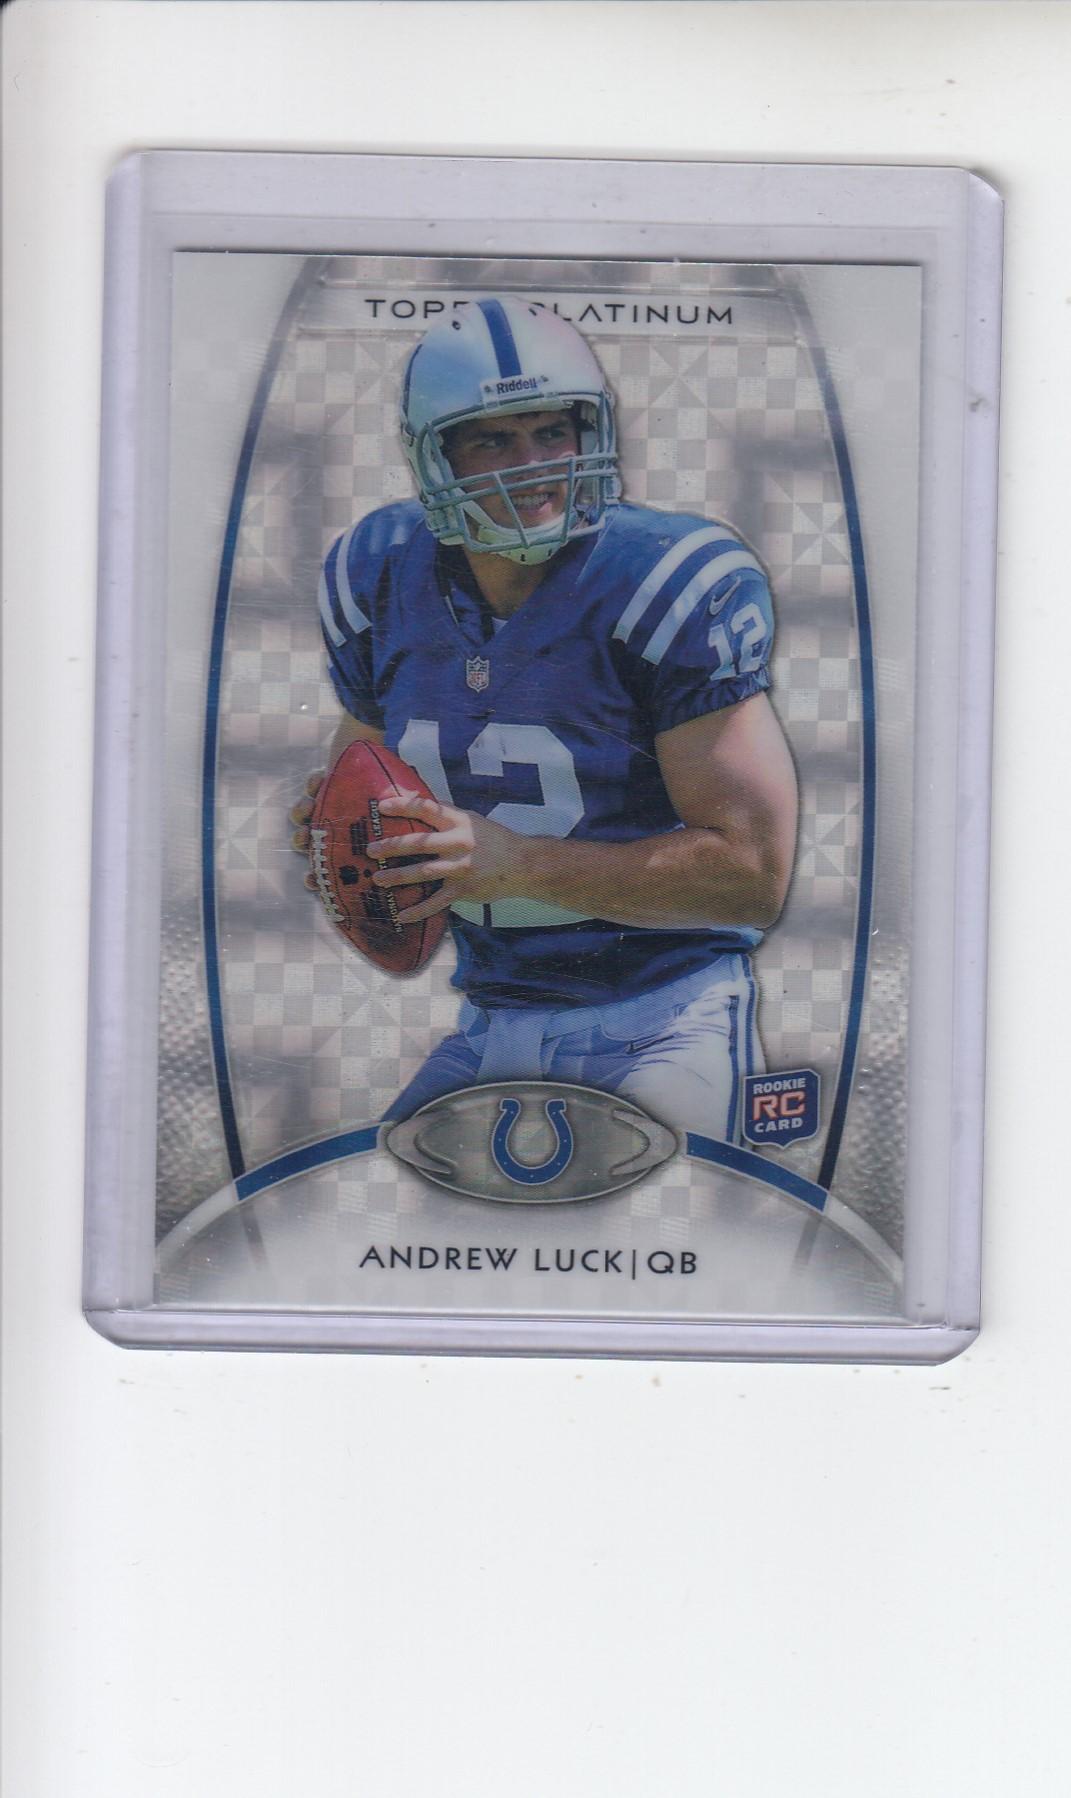 ANDREW LUCK 2012 TOPPS PLATINUM XFRACTOR ROOKIE CARD